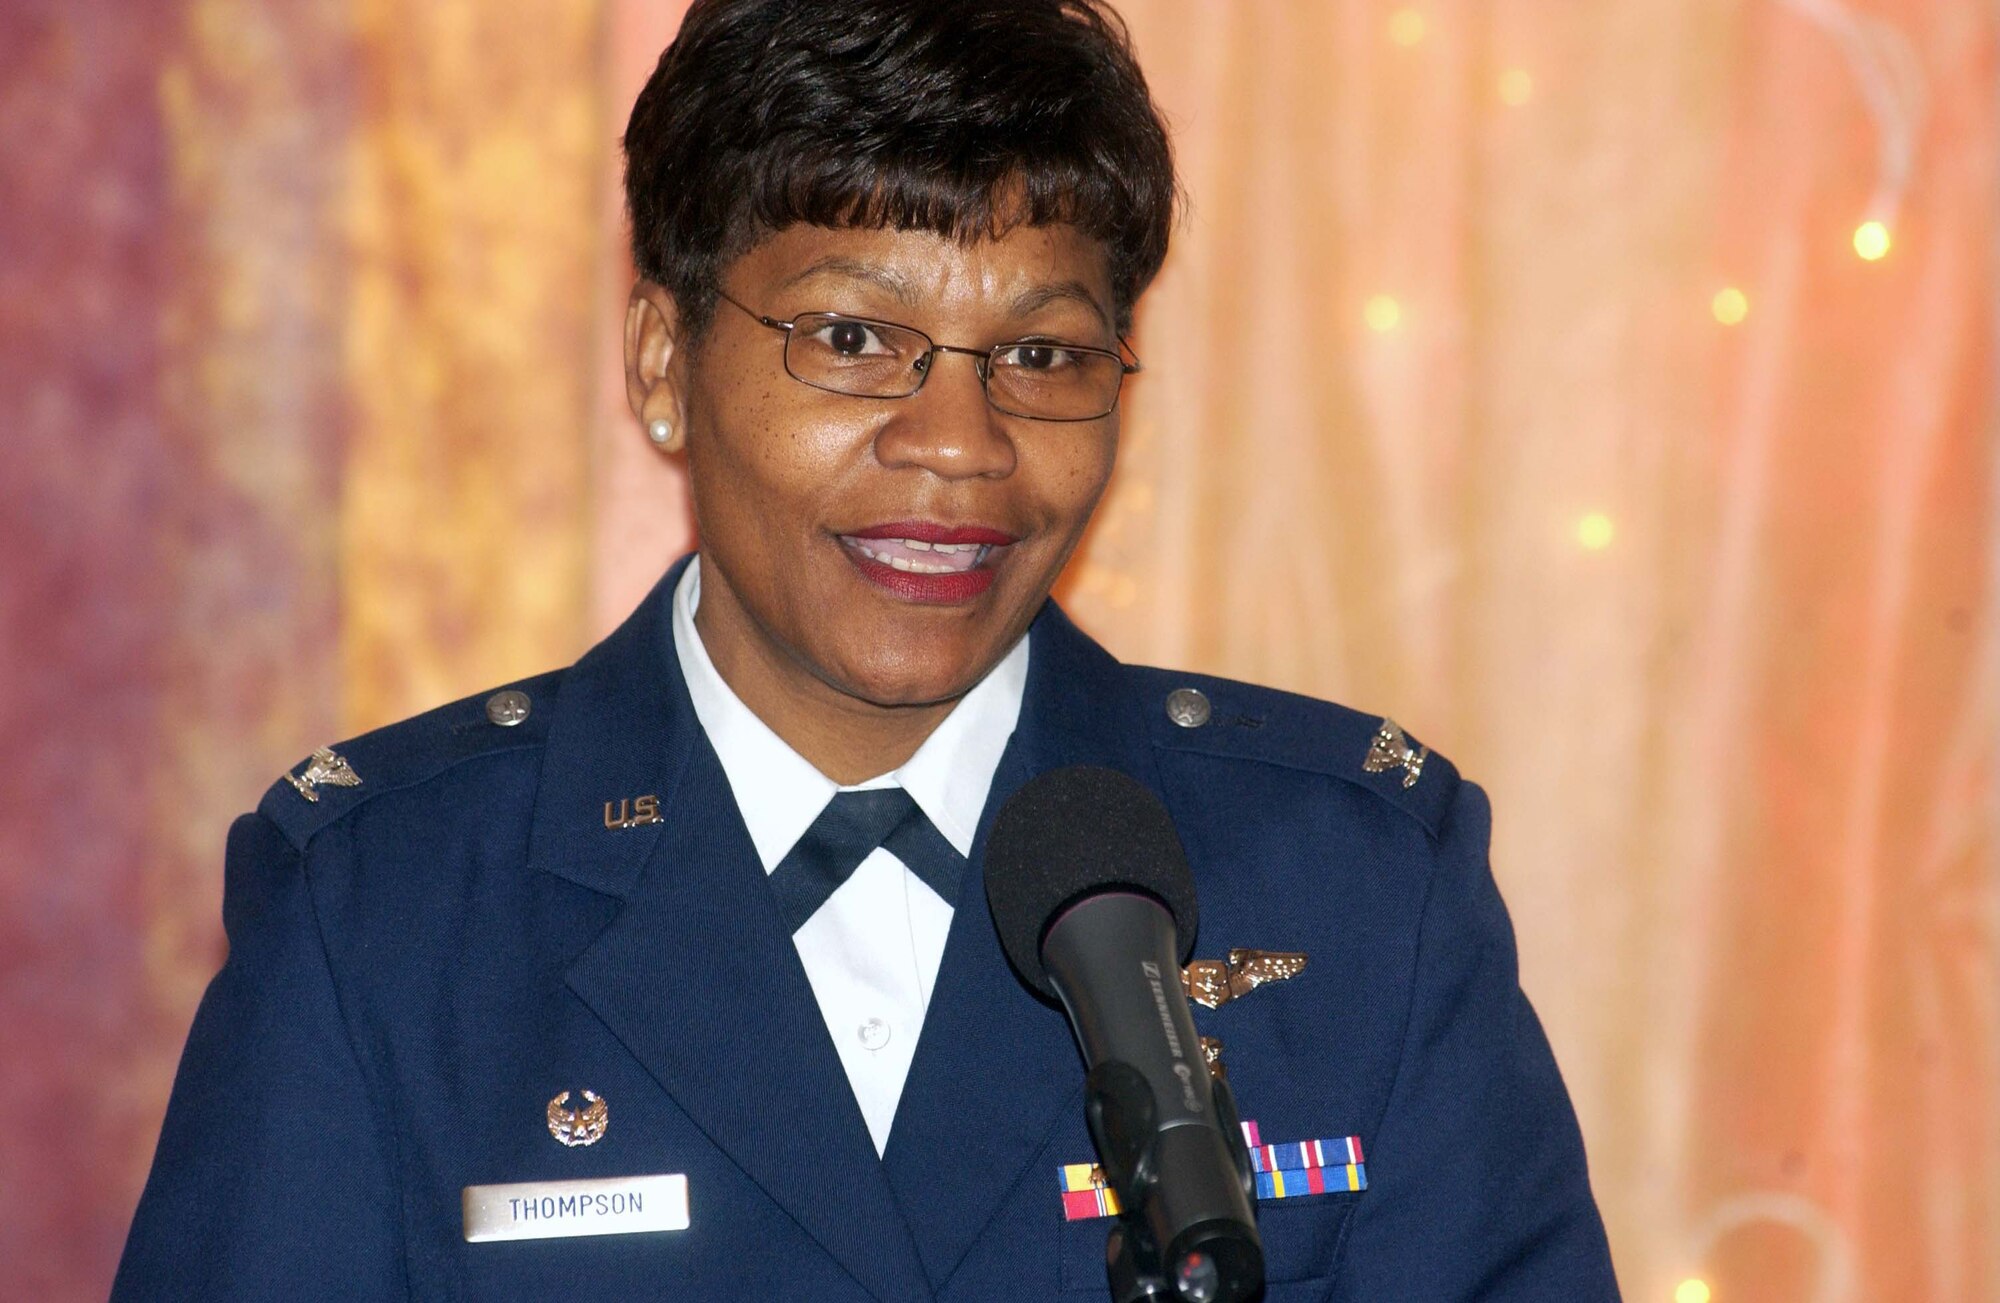 Col. Angela Thompson, 435th Medical Group commander and guest speaker, talks about inspiring others at the U.S. Army Garrison Kaiserslautern's 2008 Women's History Month observance March 28 at the Armstrong Community Club on Vogelweh Housing. Photo by Christine June